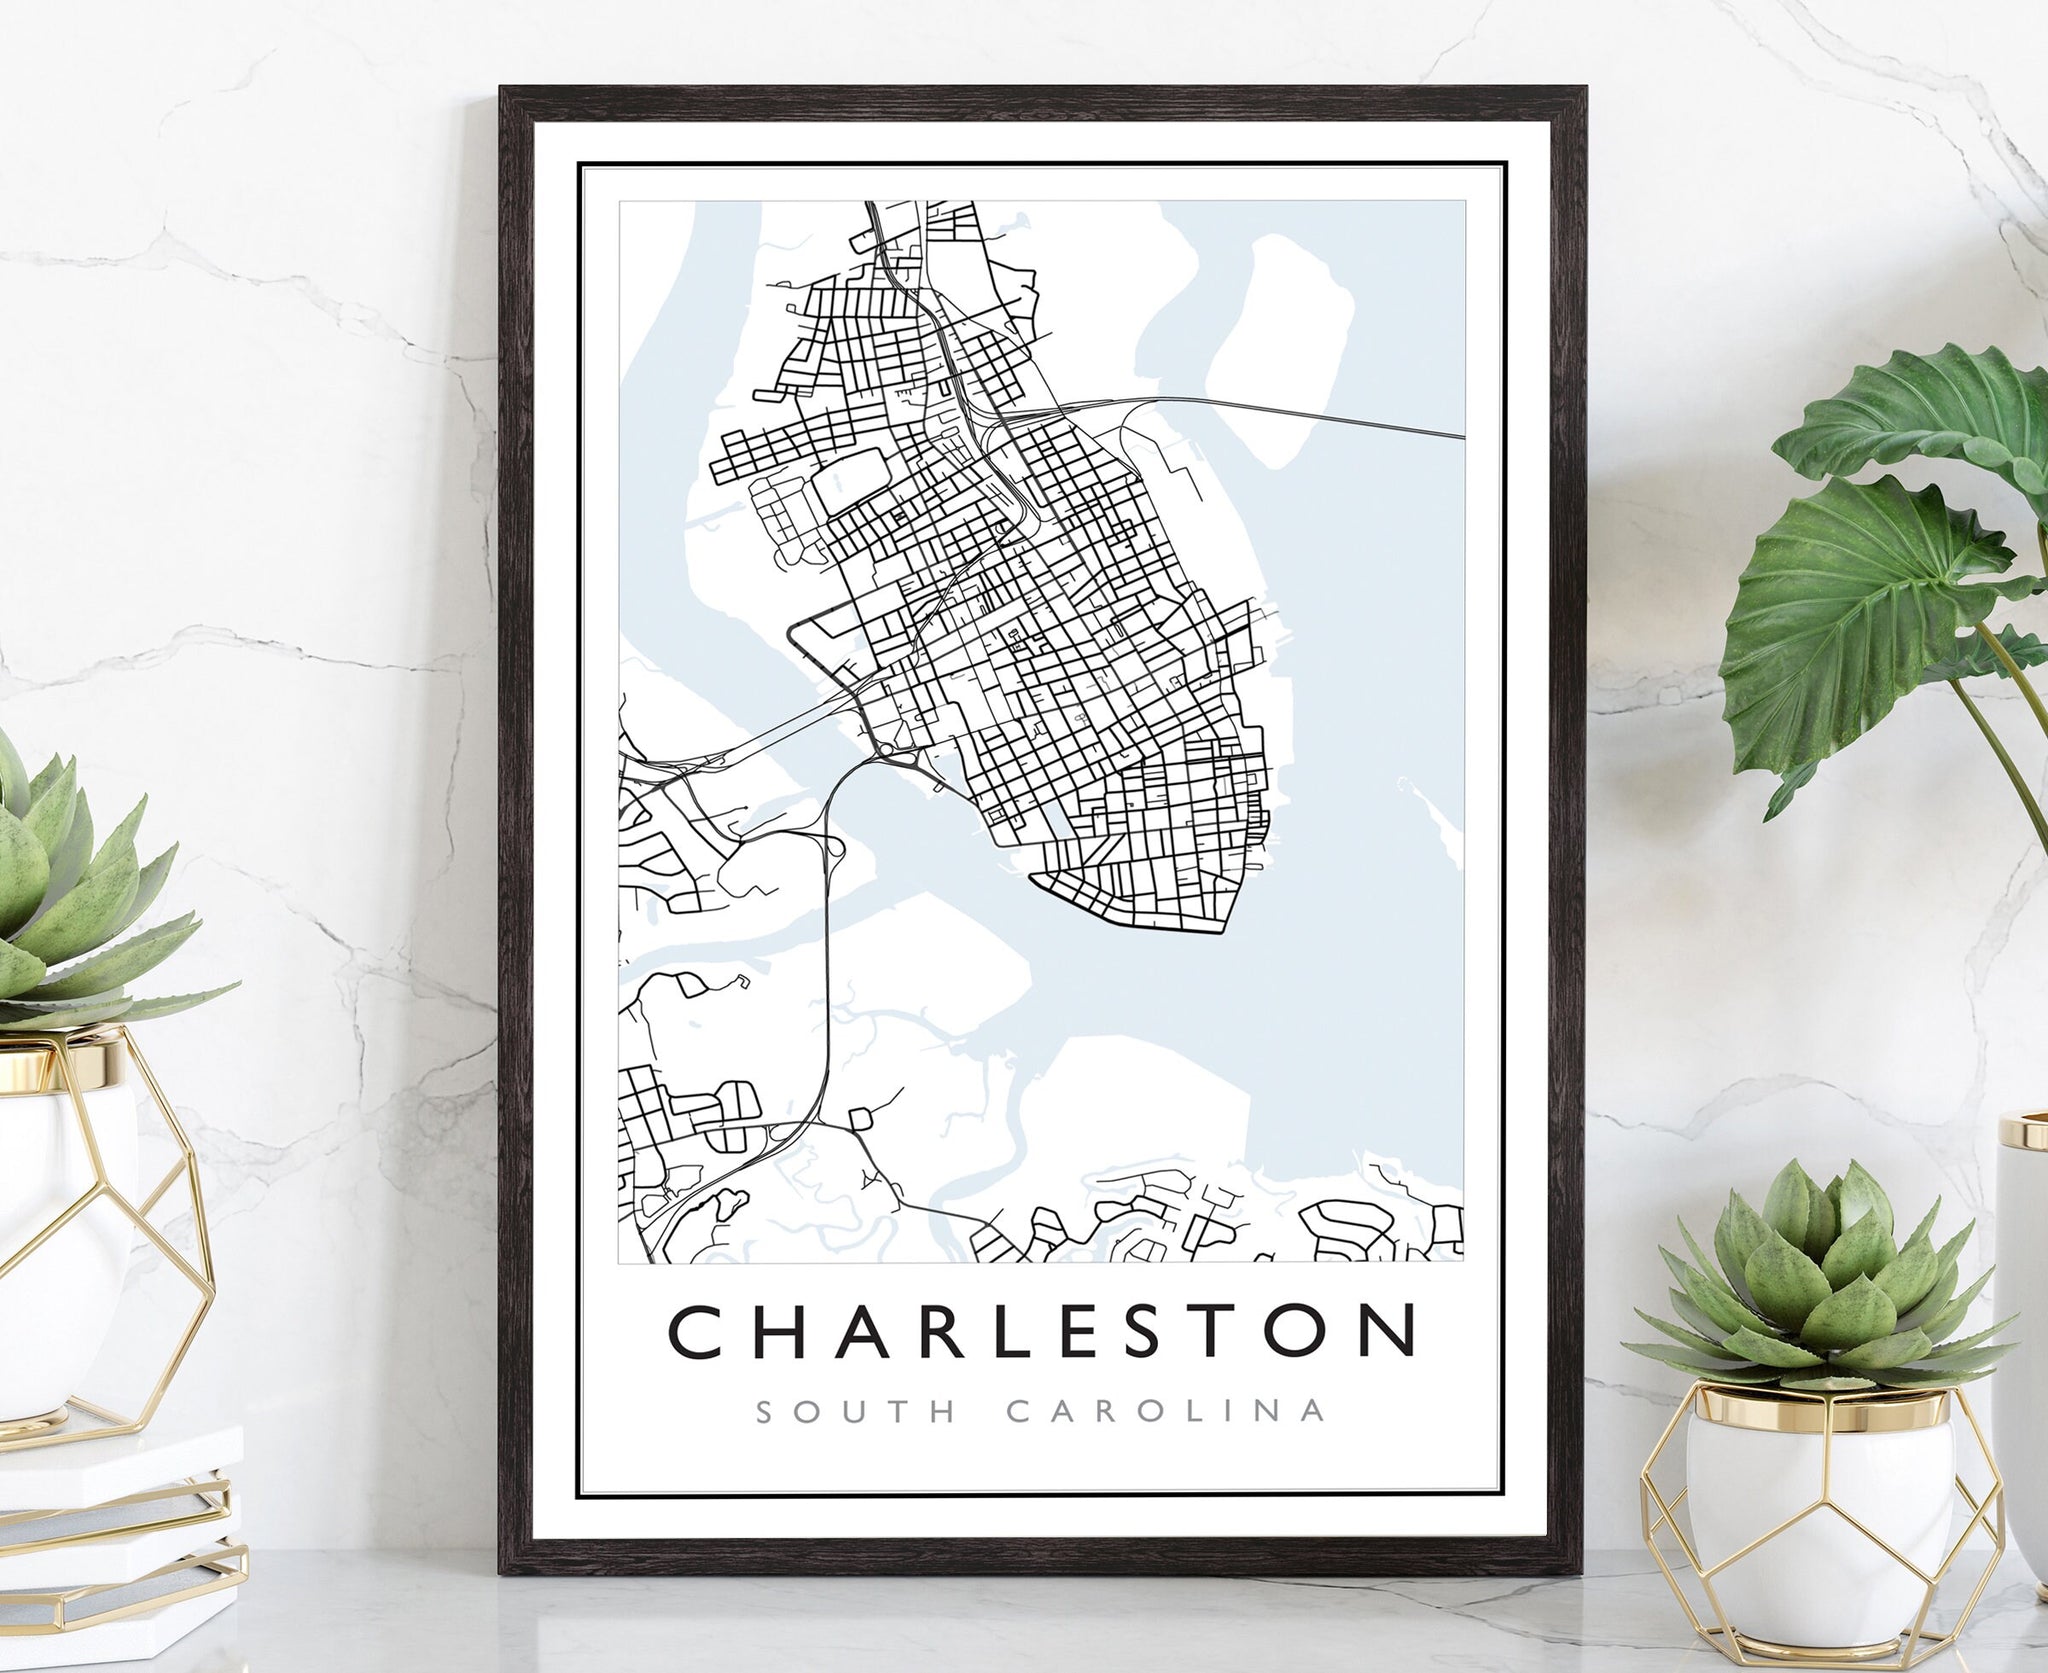 Charleston City Map, States Road Map Poster, Charleston South Carolina Poster, City Street Map, Minimalist Map Poster, Home Office Wall Art